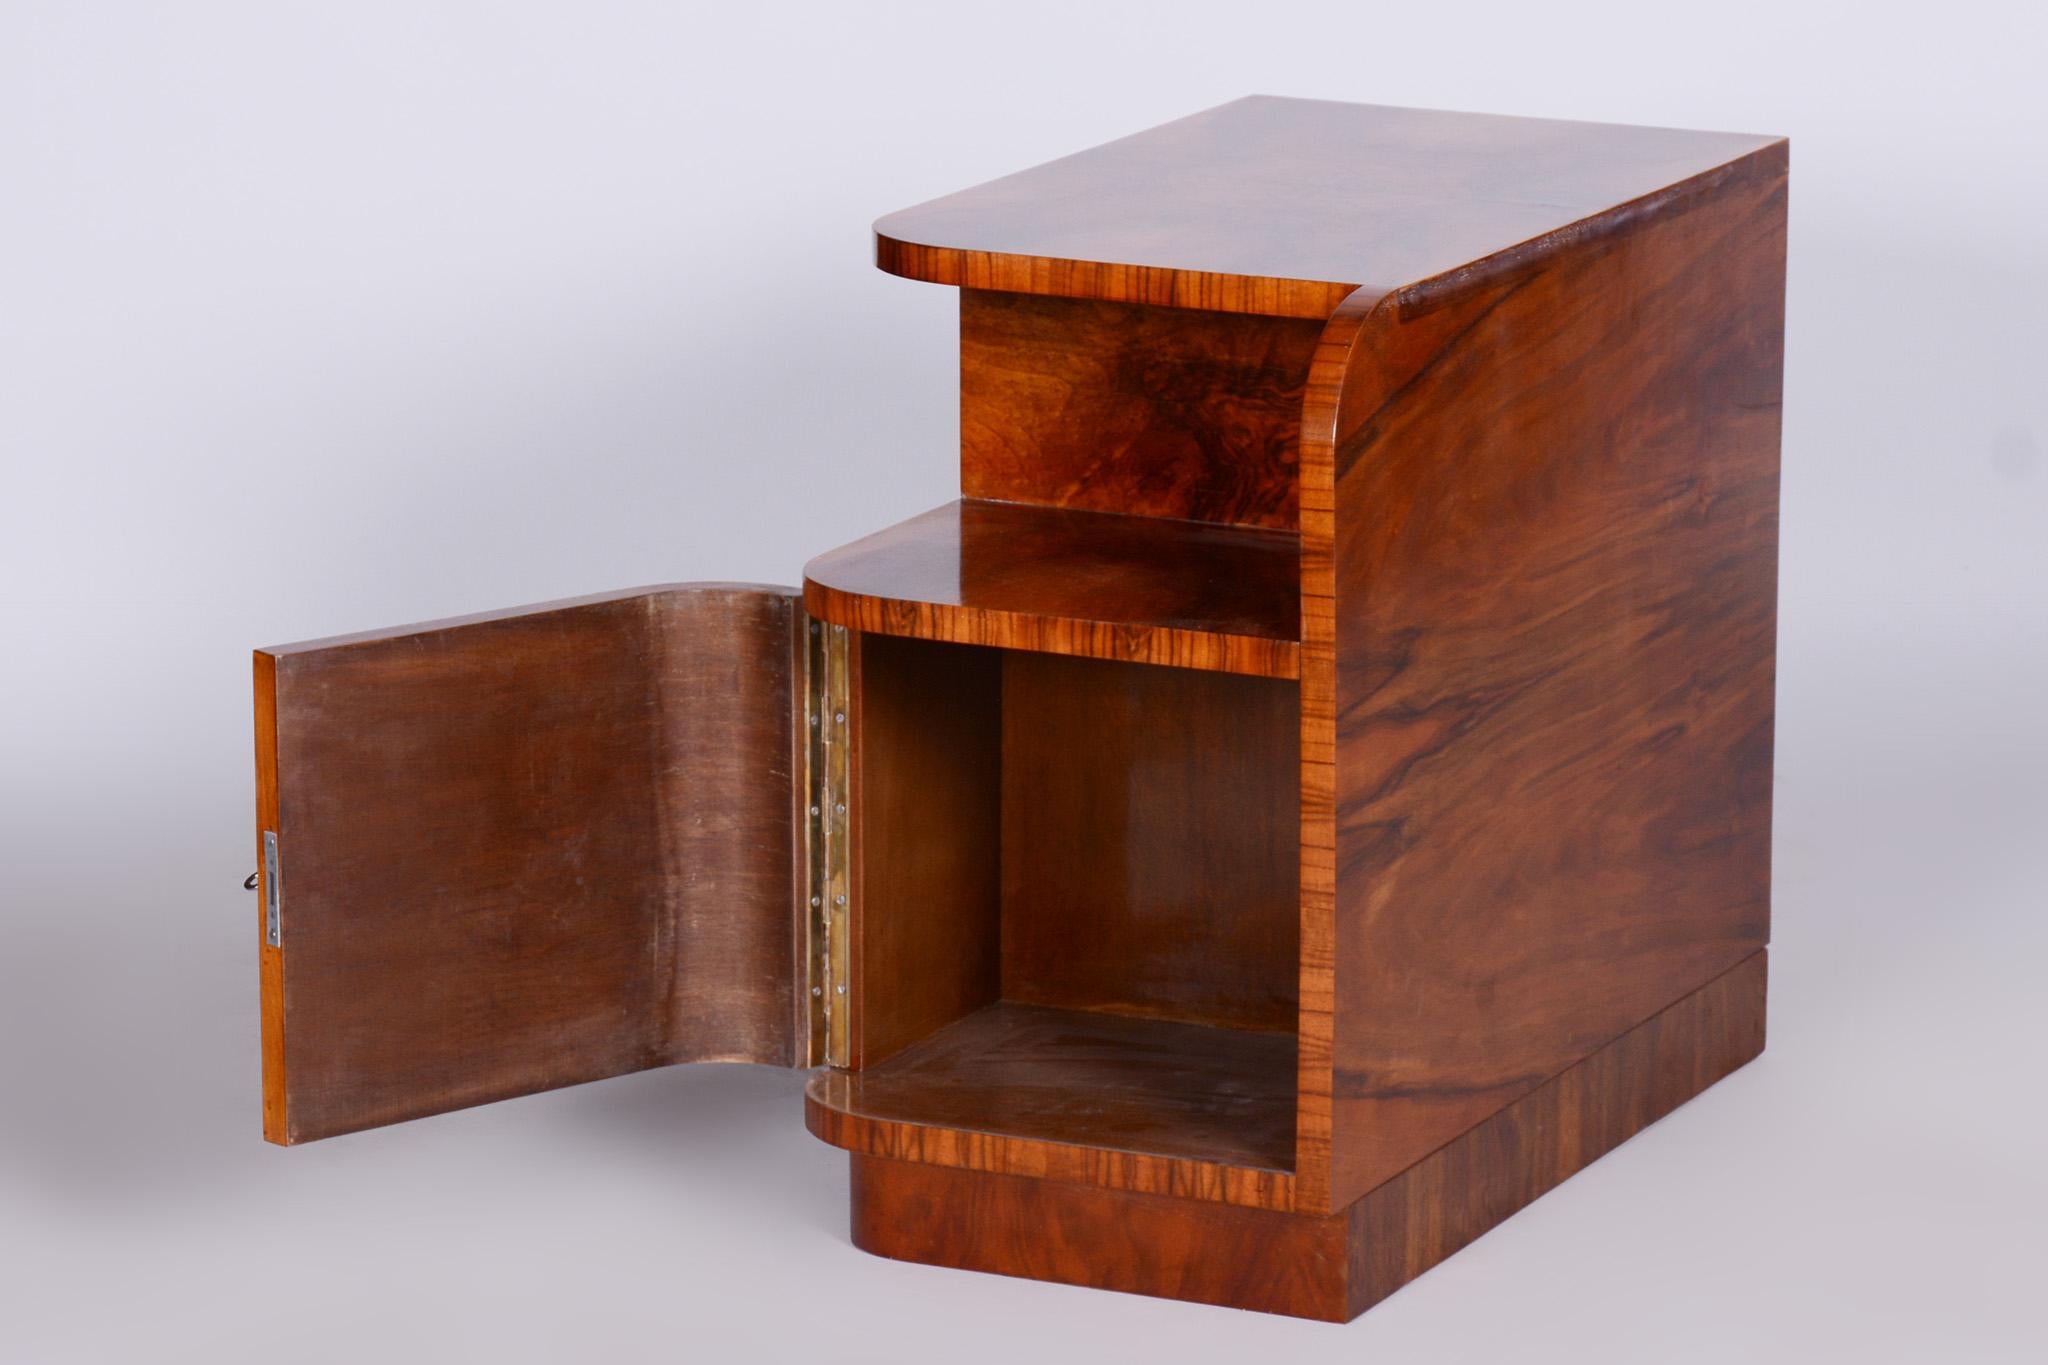 Glass Small Art Deco Walnut Cabinet, Well-Preserved Original Condition, Czechia, 1930s For Sale